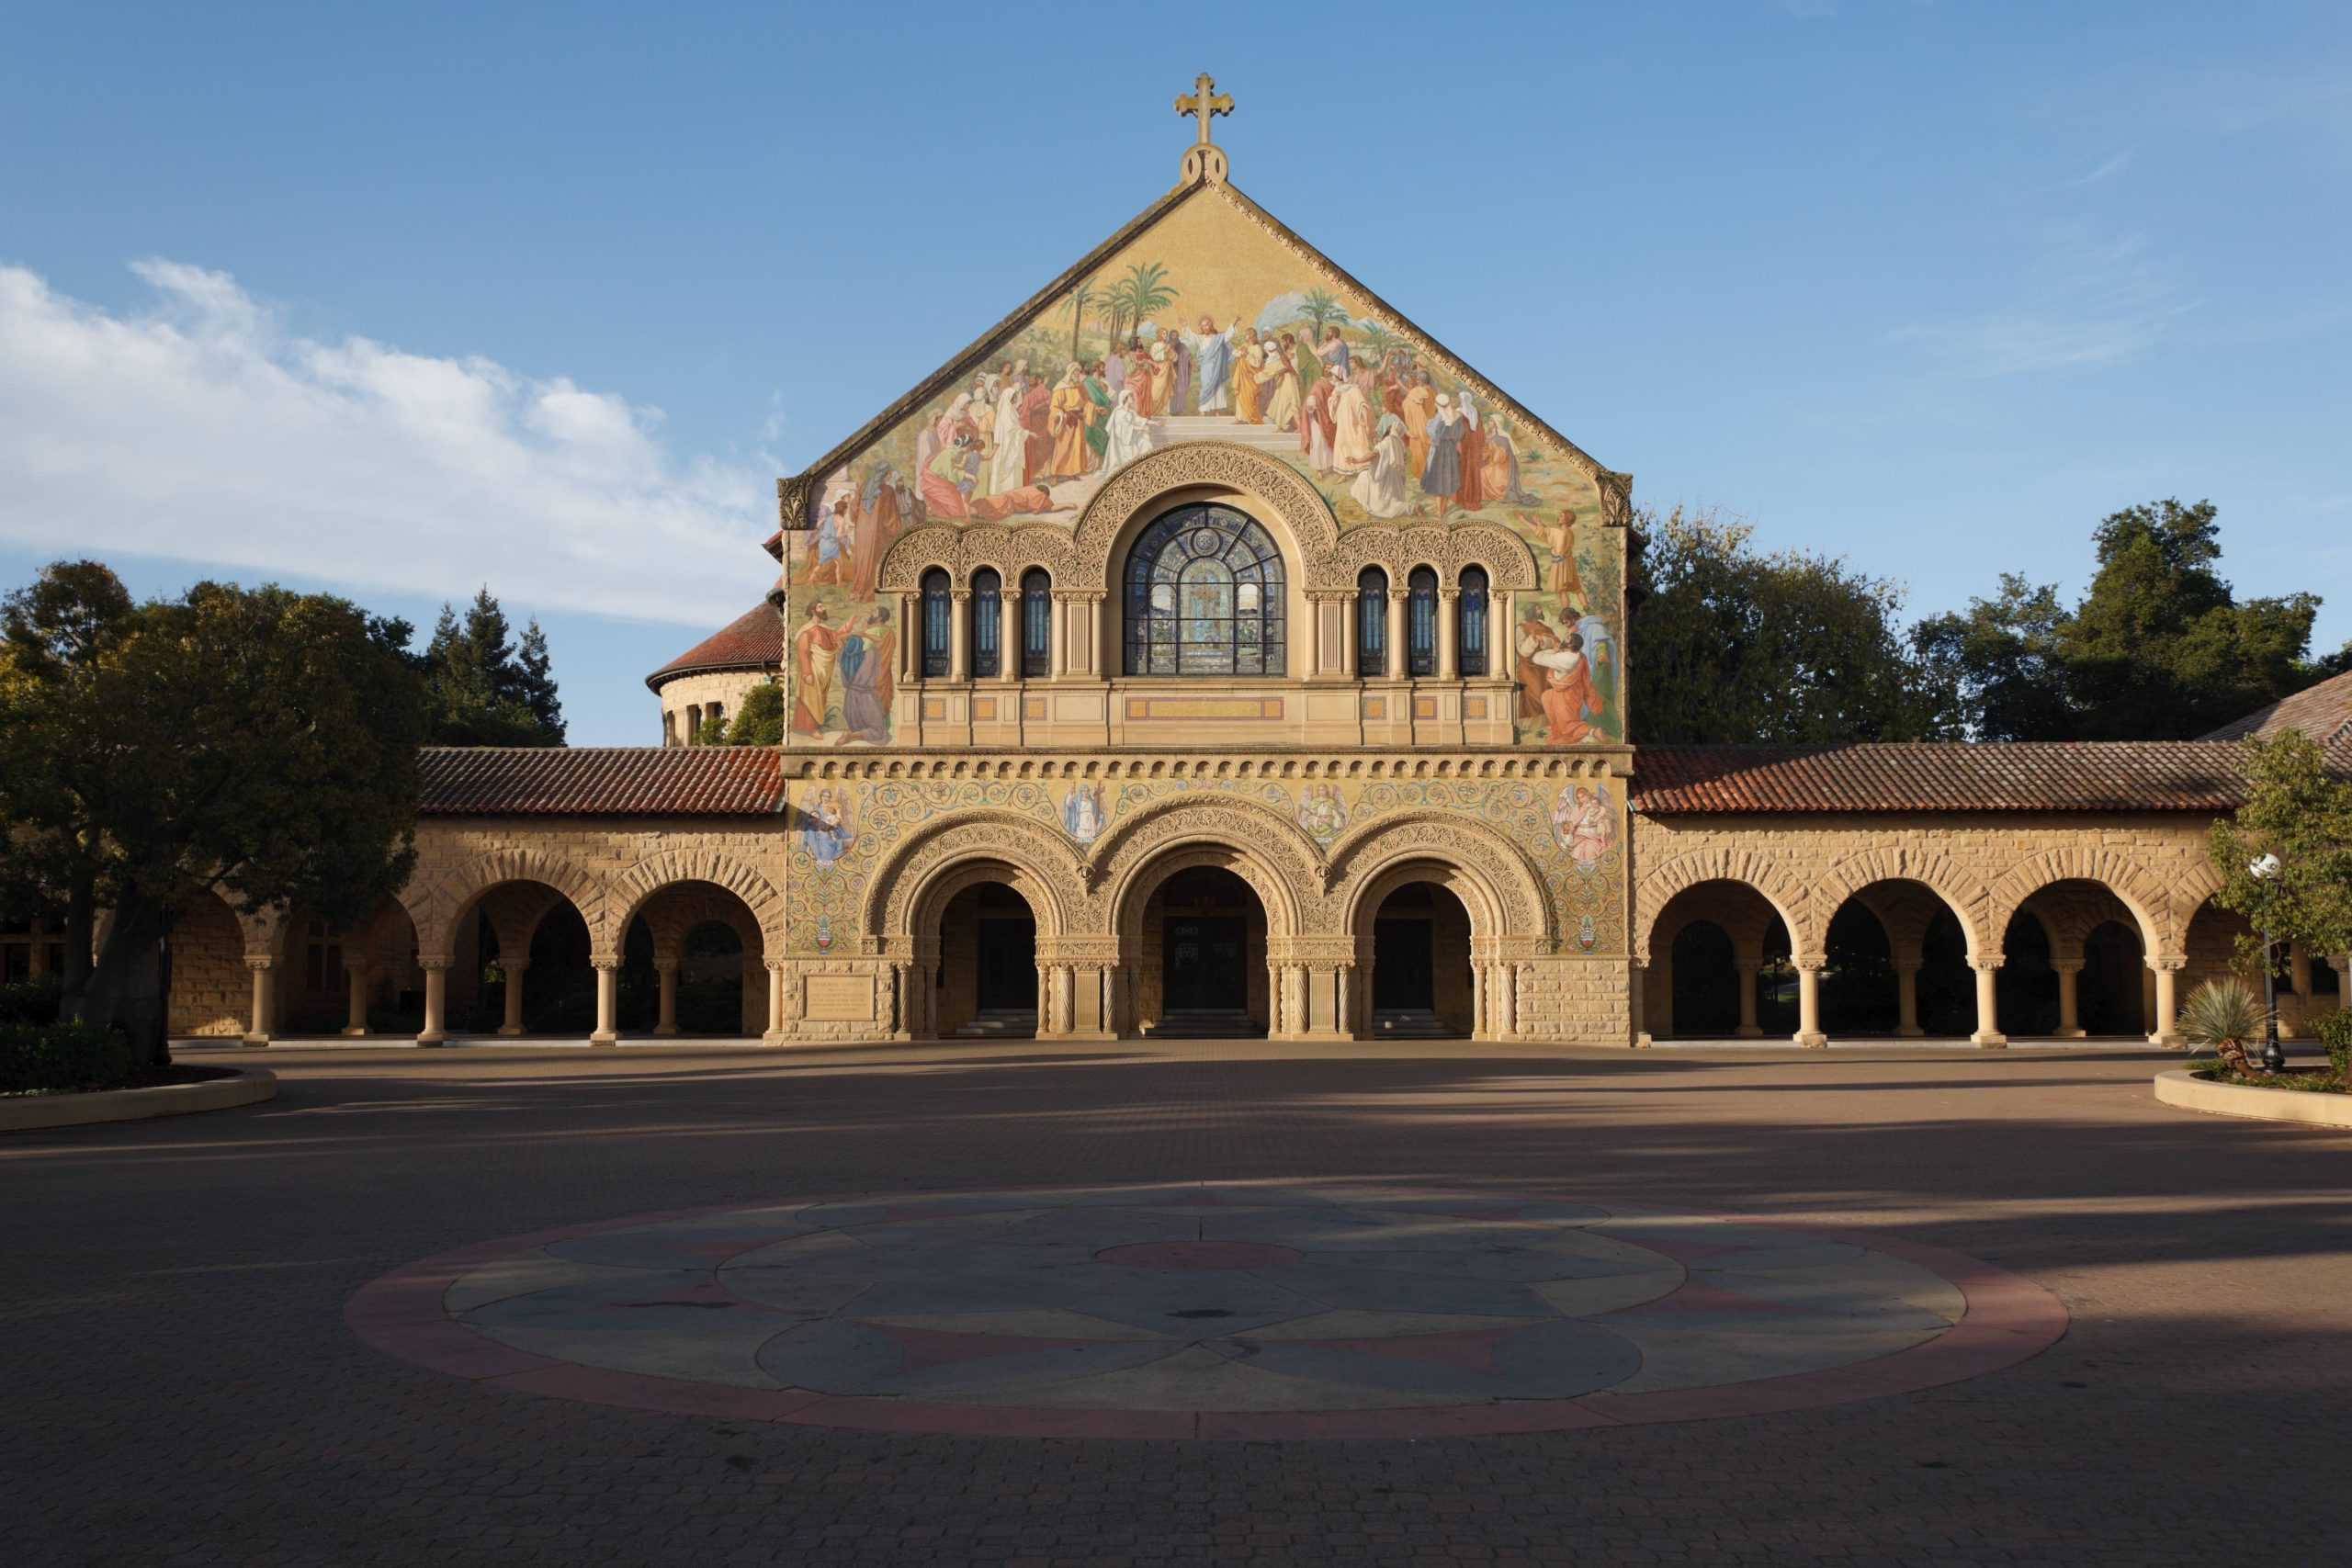 Paly choir program presents its opening night concert at Stanford Memorial Church